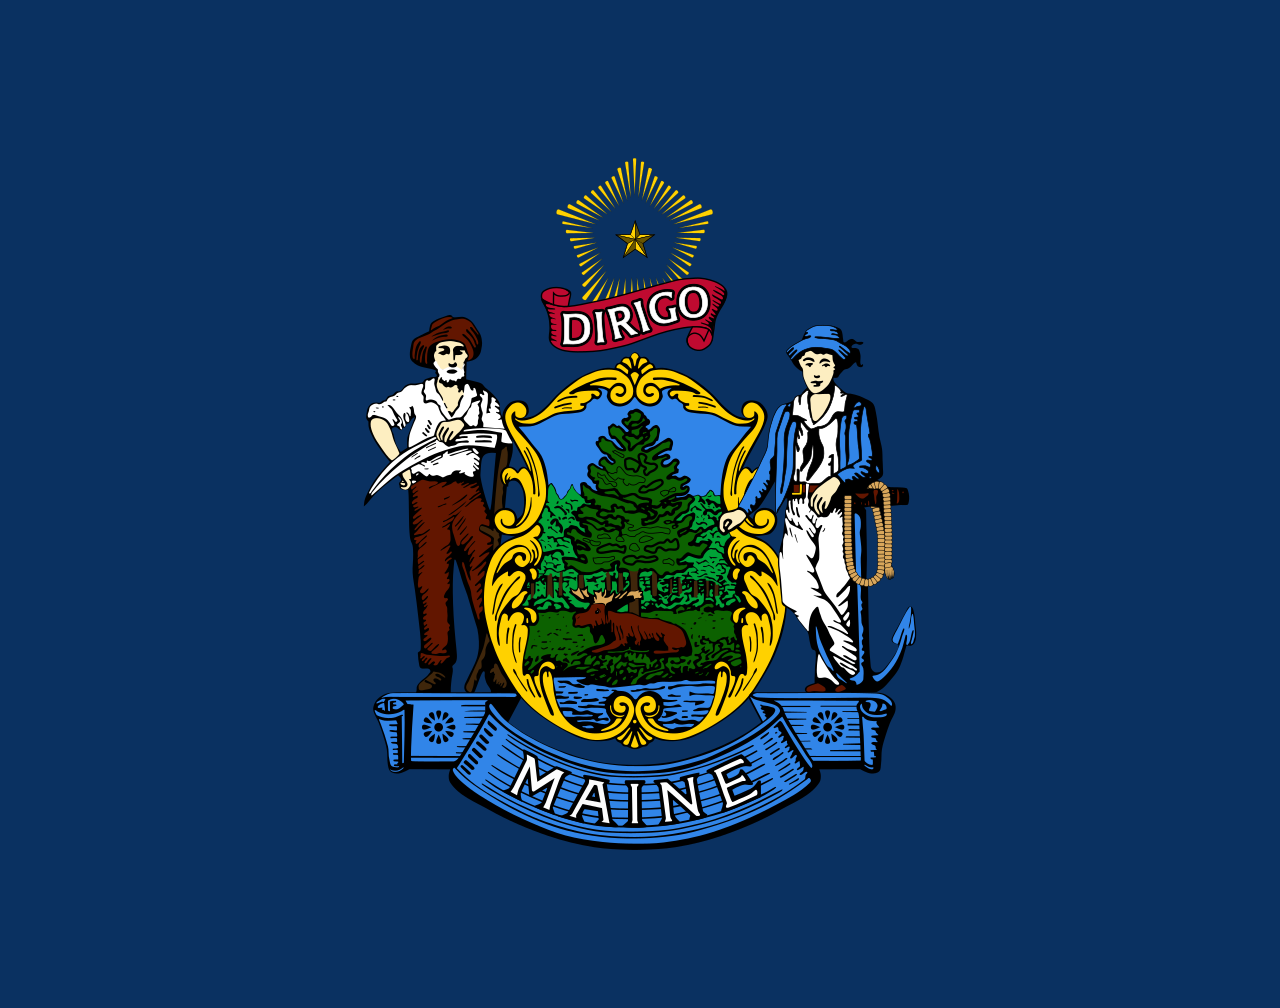 The official state flag of Maine was adopted in 1909 and features Maine's state coat of arms on a blue field. - History By Mail